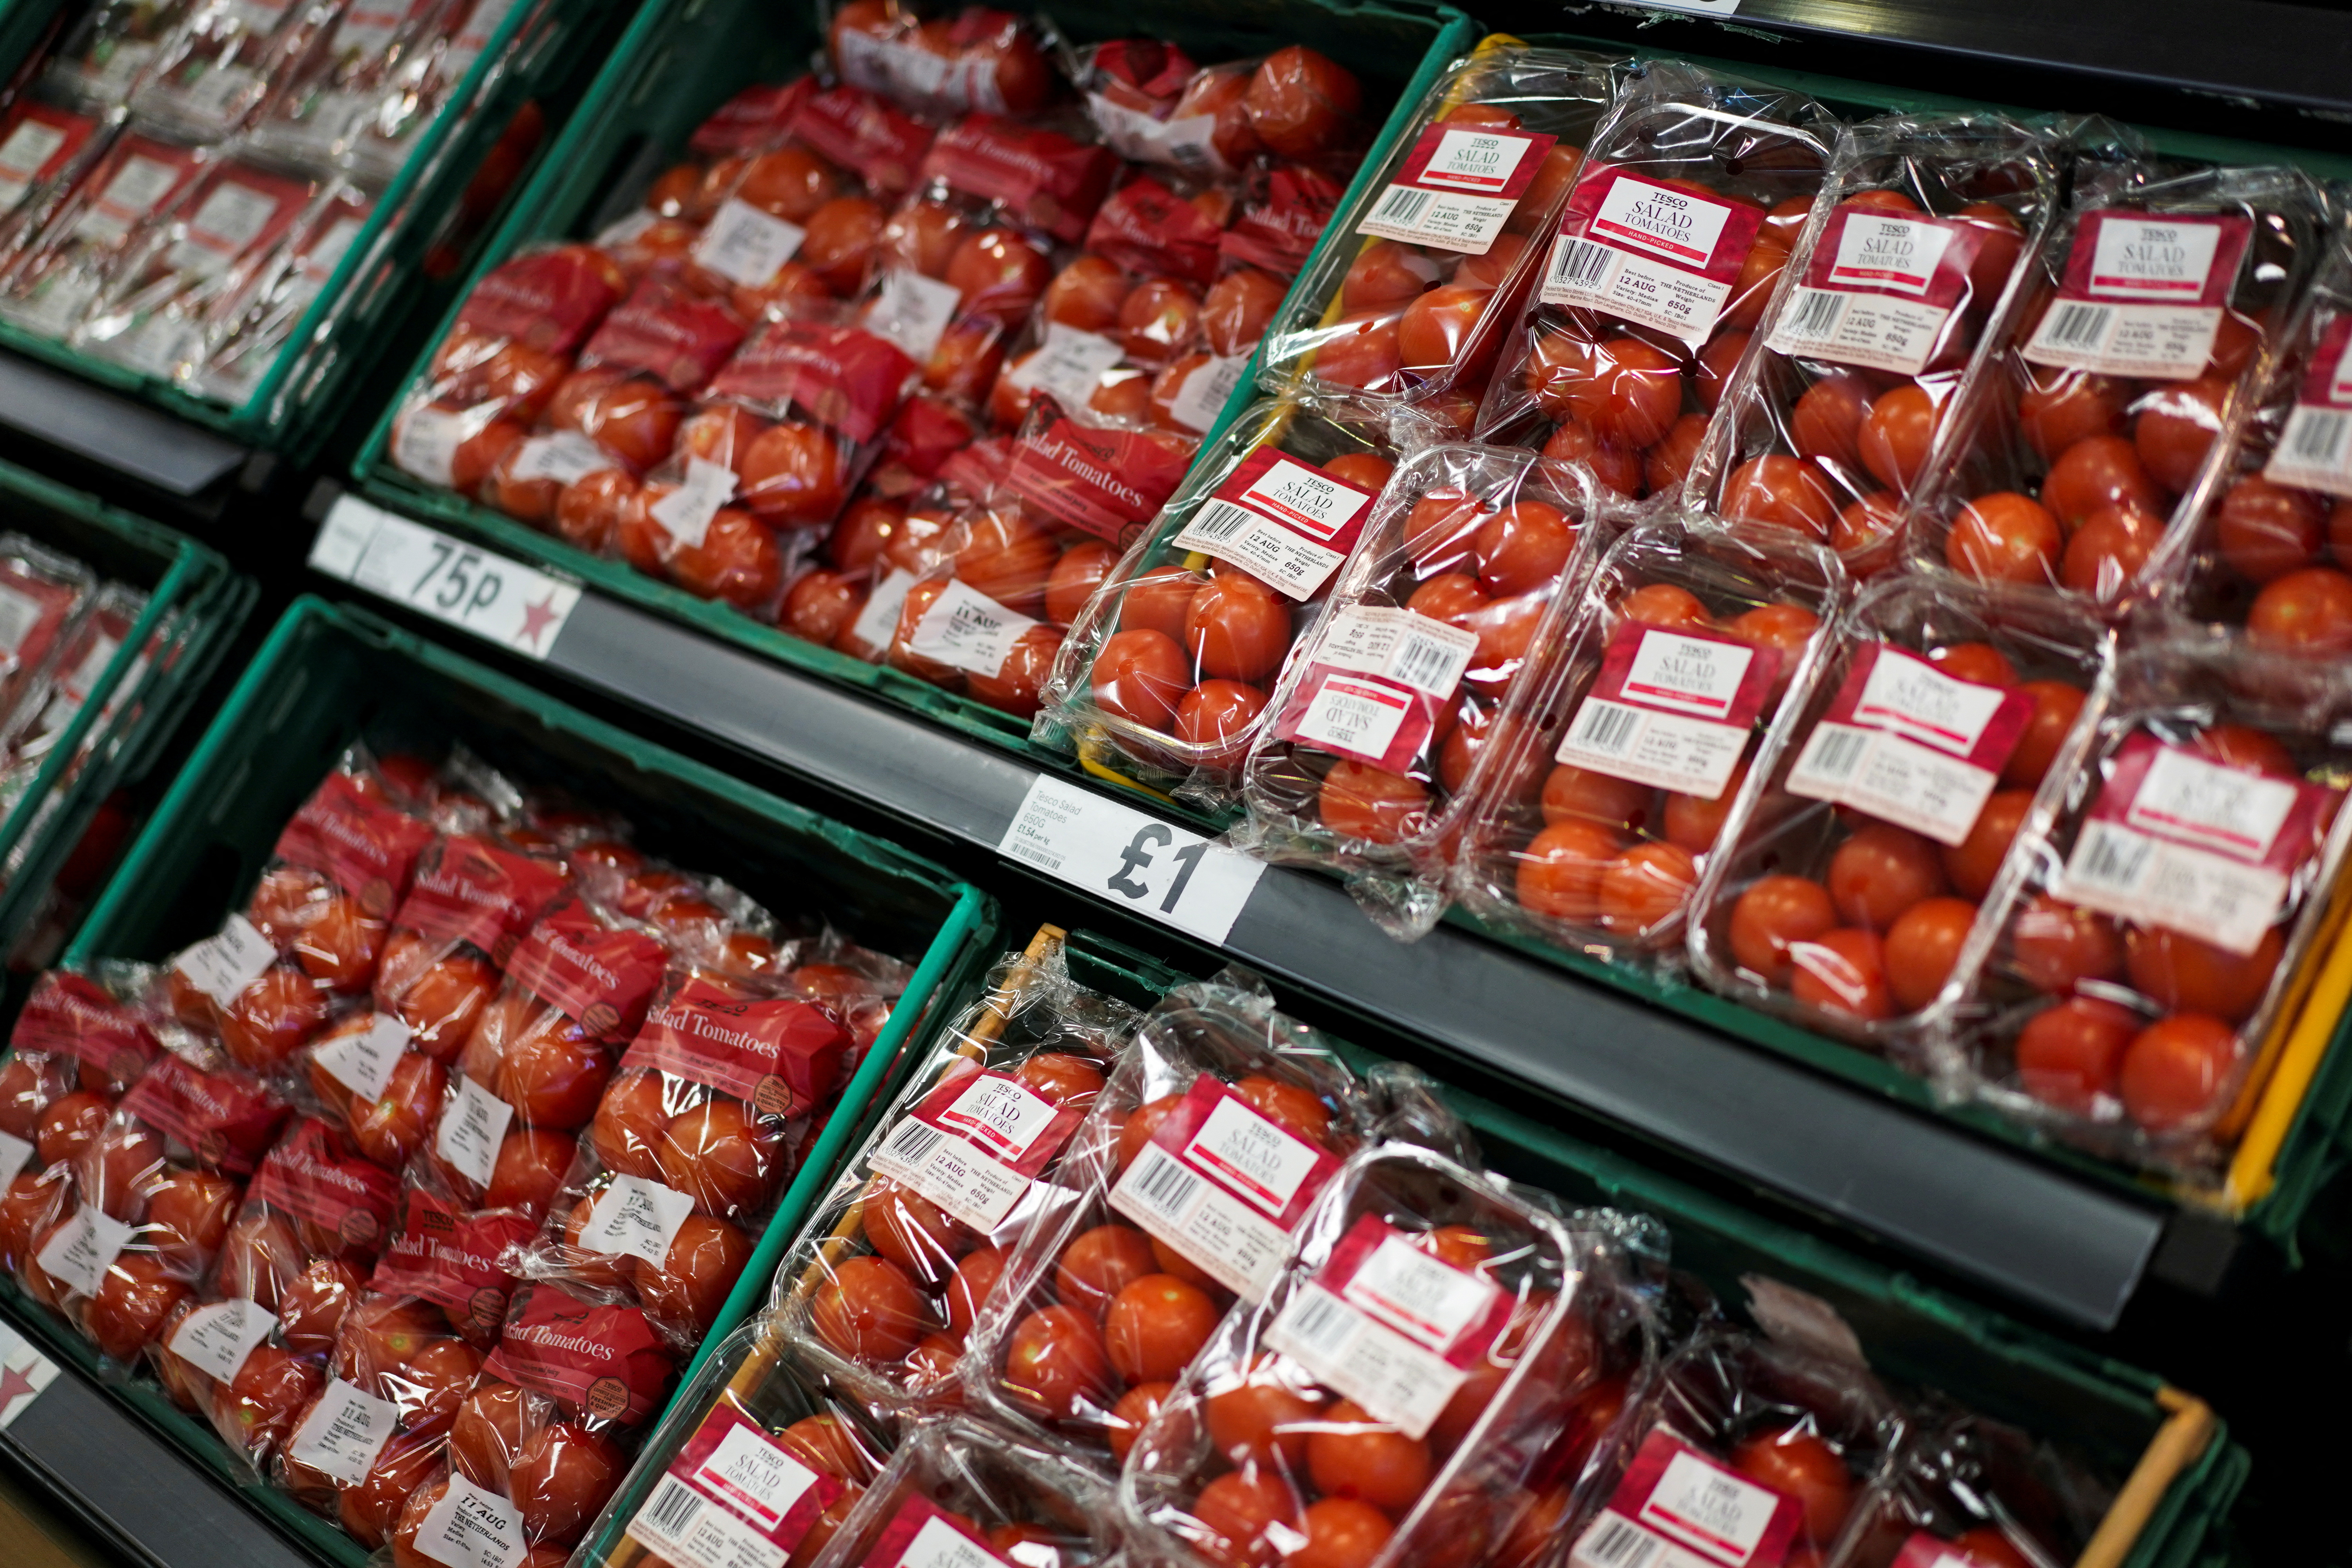 Tomatoes are displayed for sale inside a supermarket in London